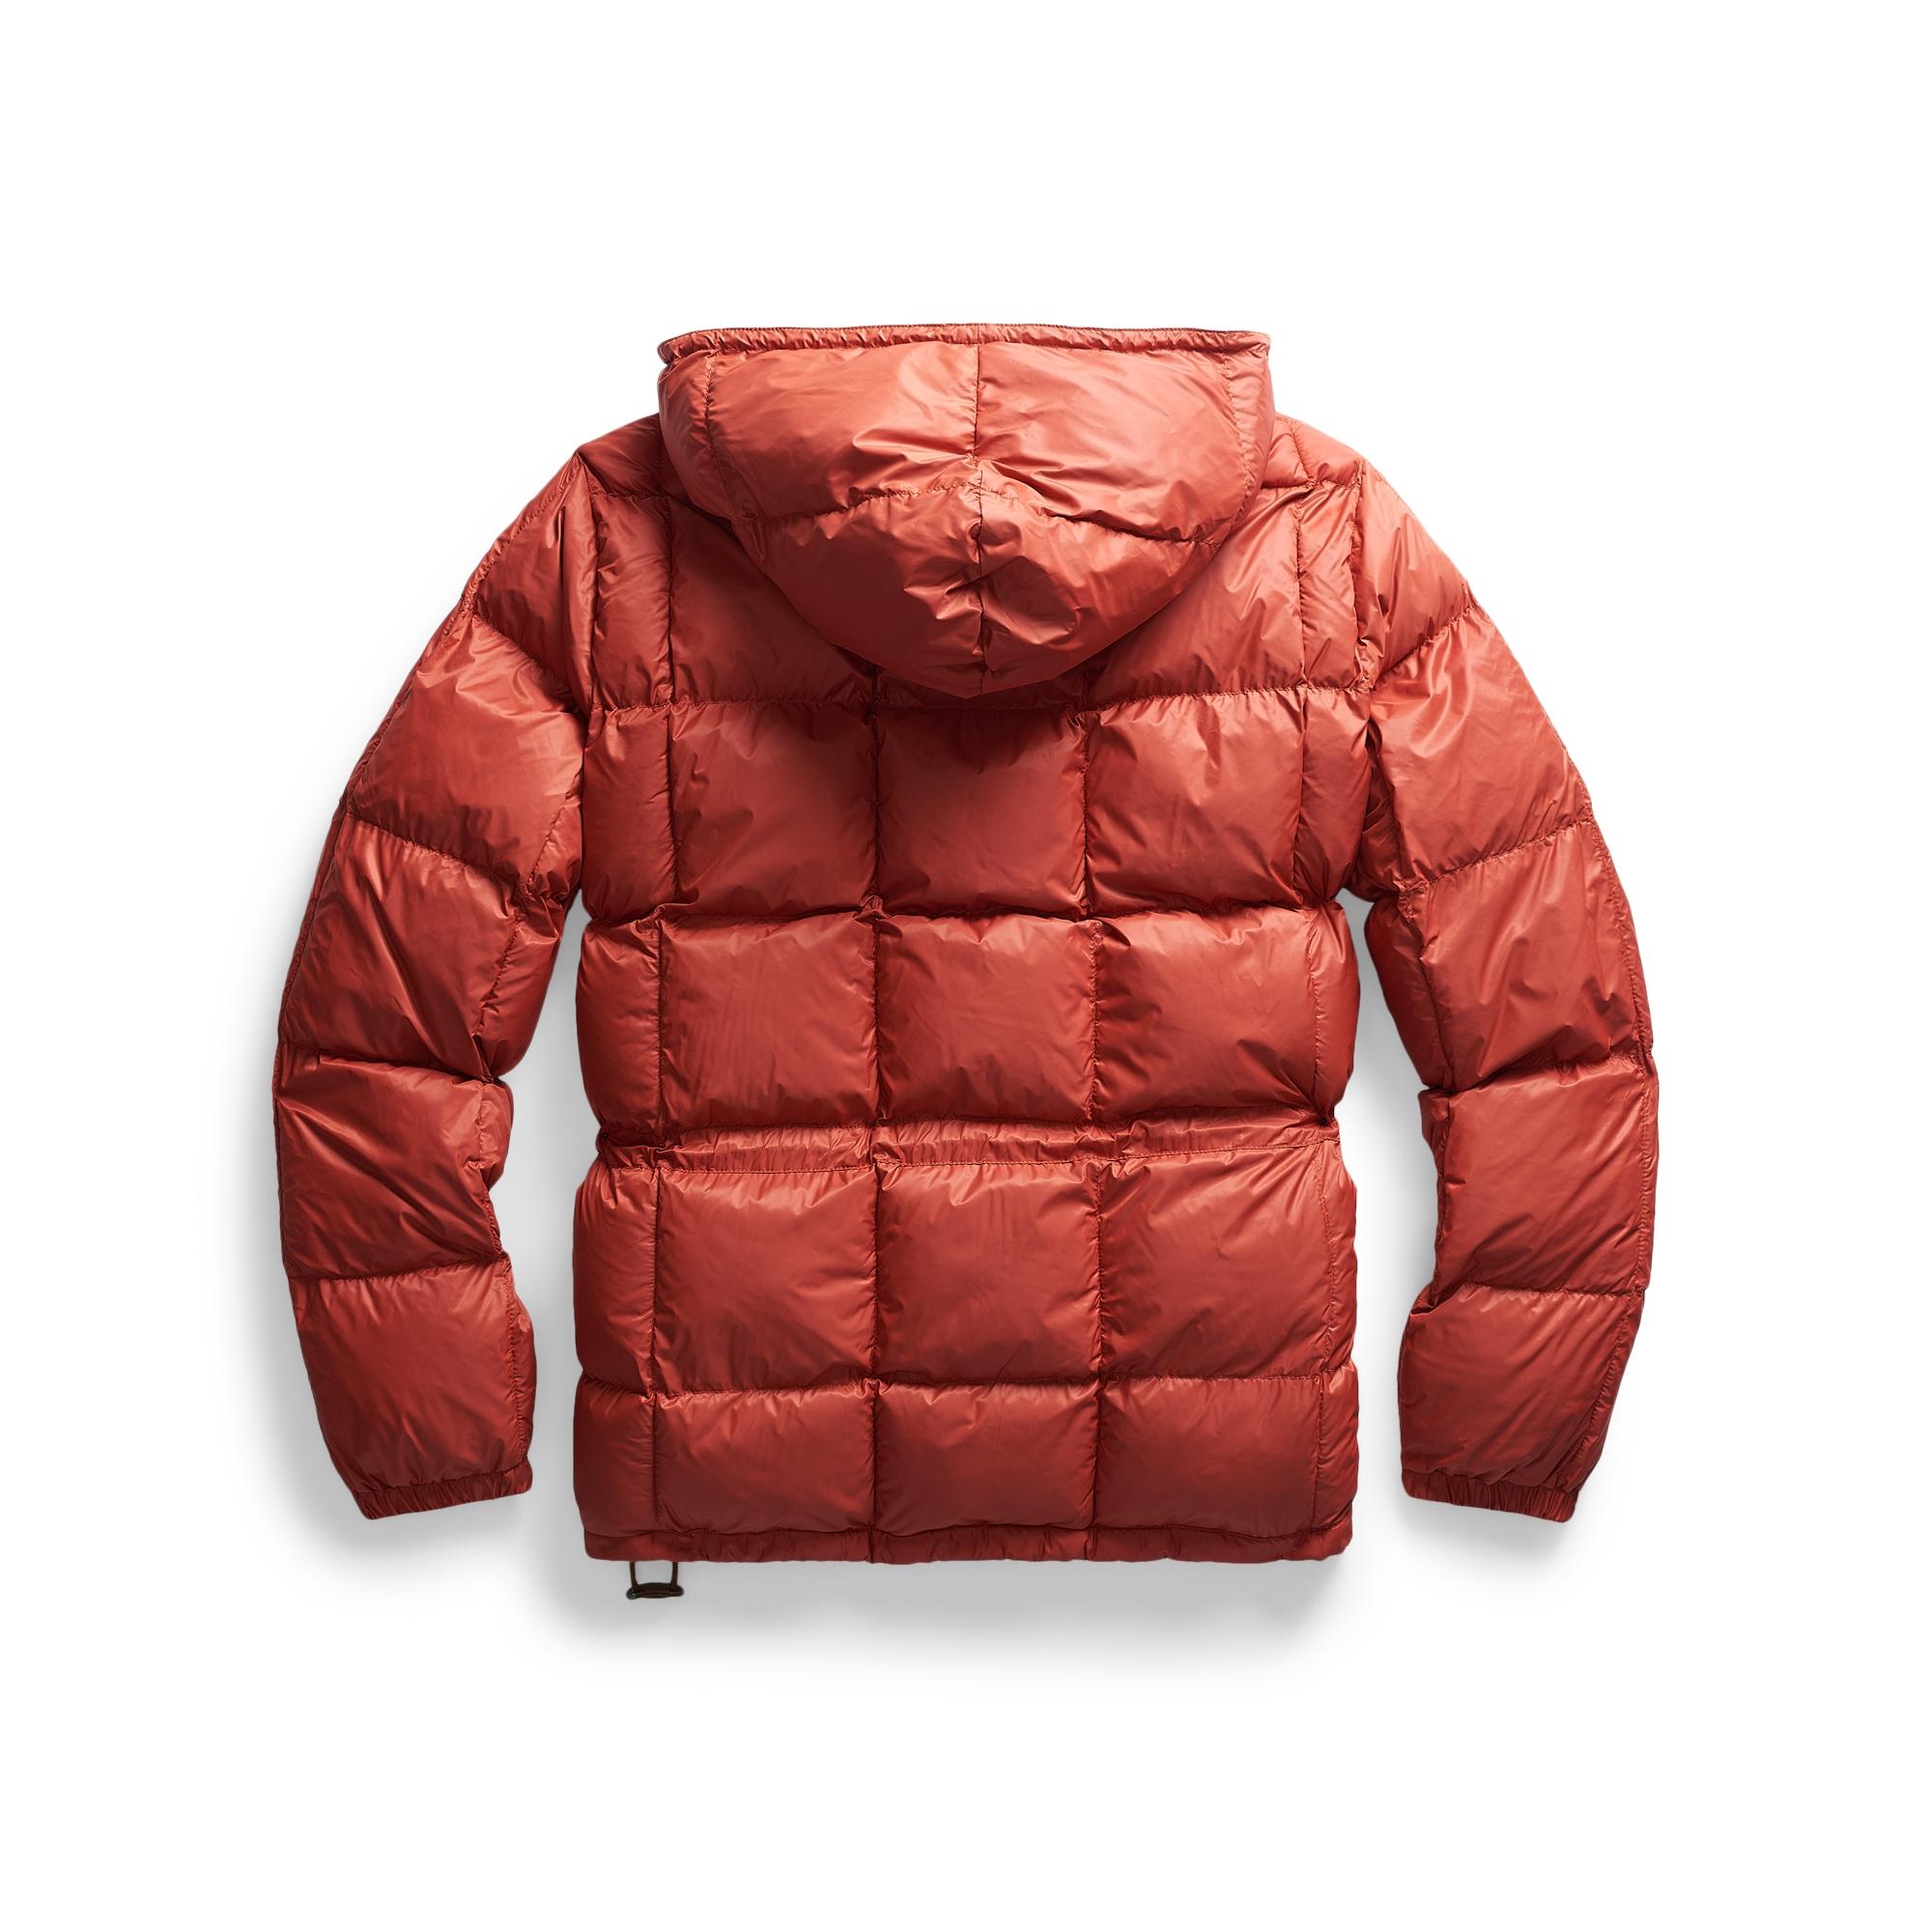 RRL Leather Quilted Hooded Jacket in Red for Men - Lyst